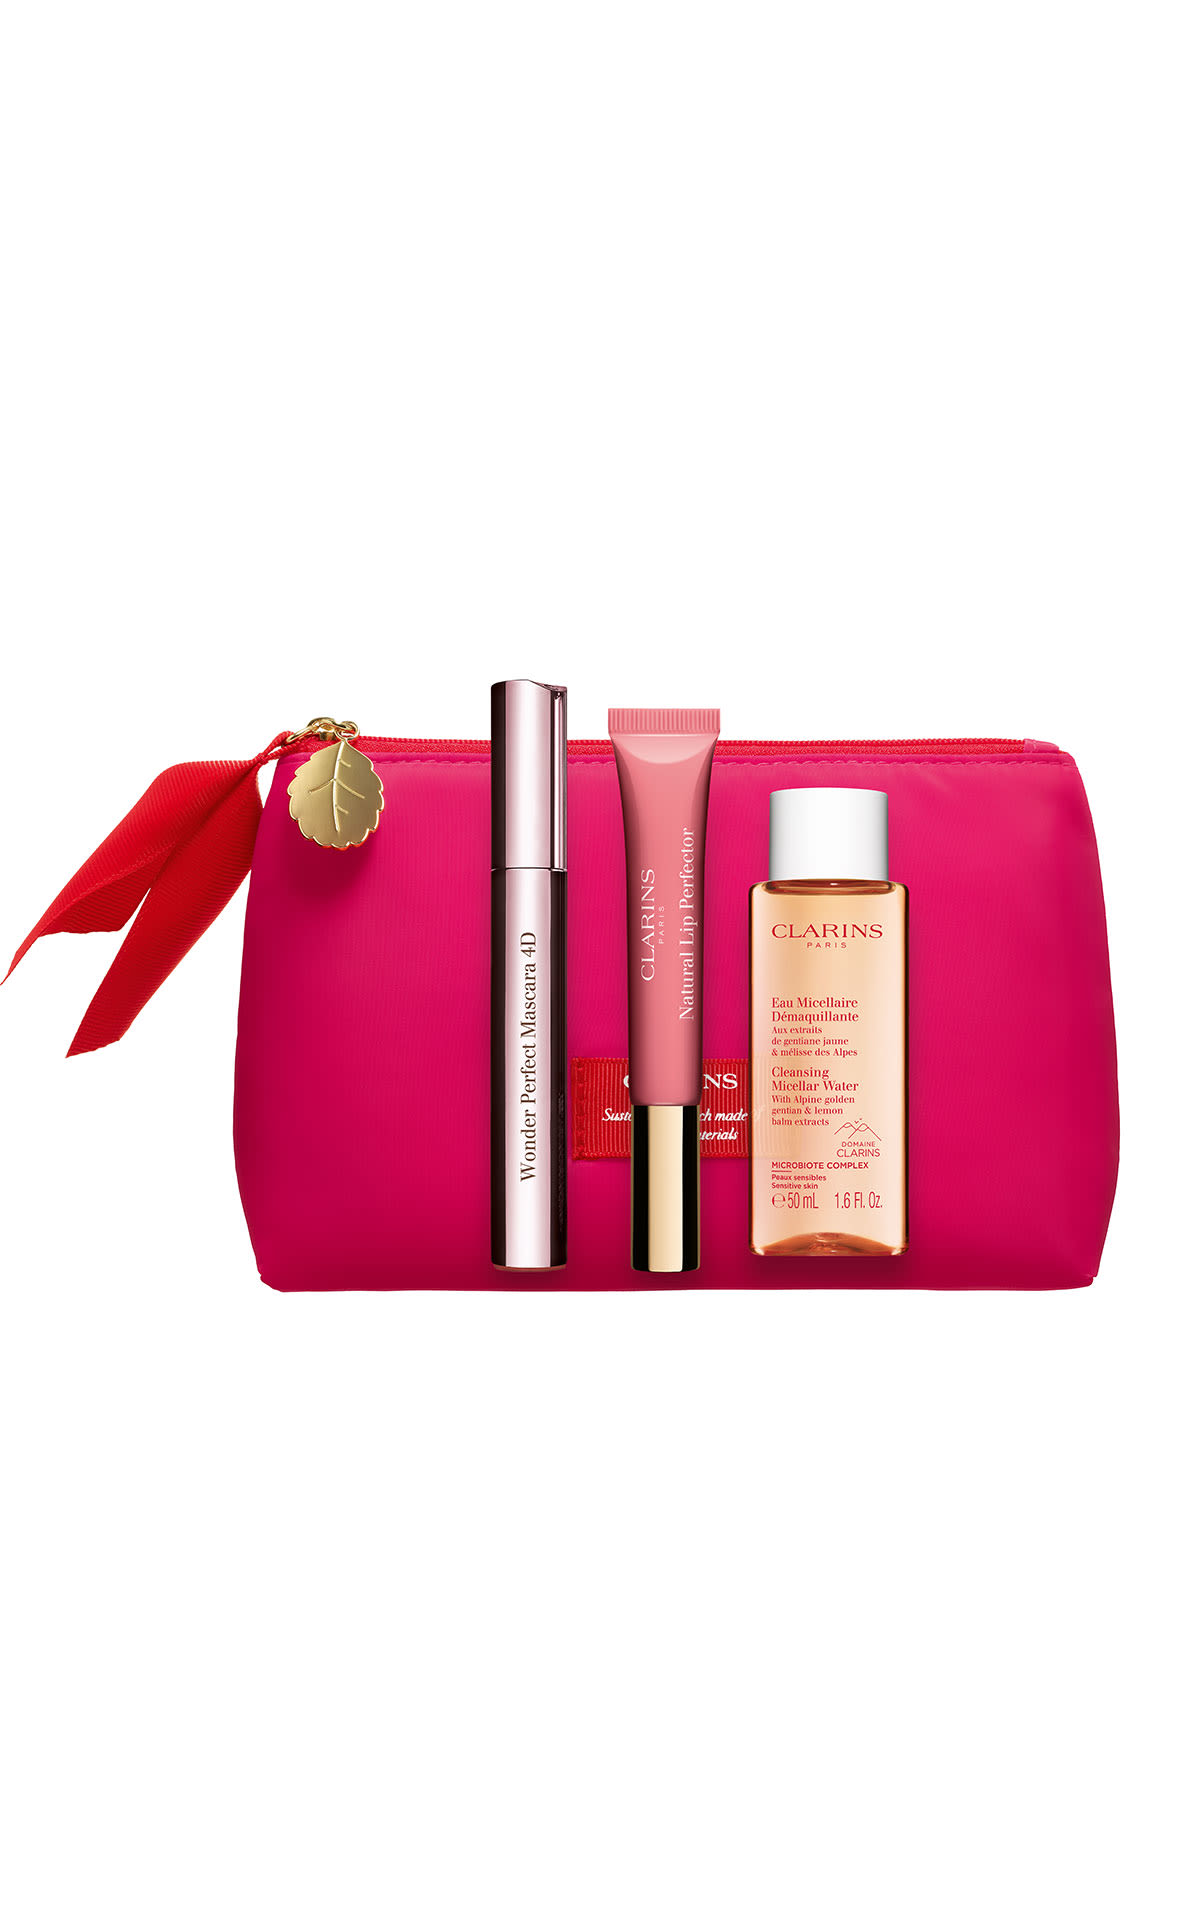 Clarins Wonder perfect 4D collection from Bicester Village